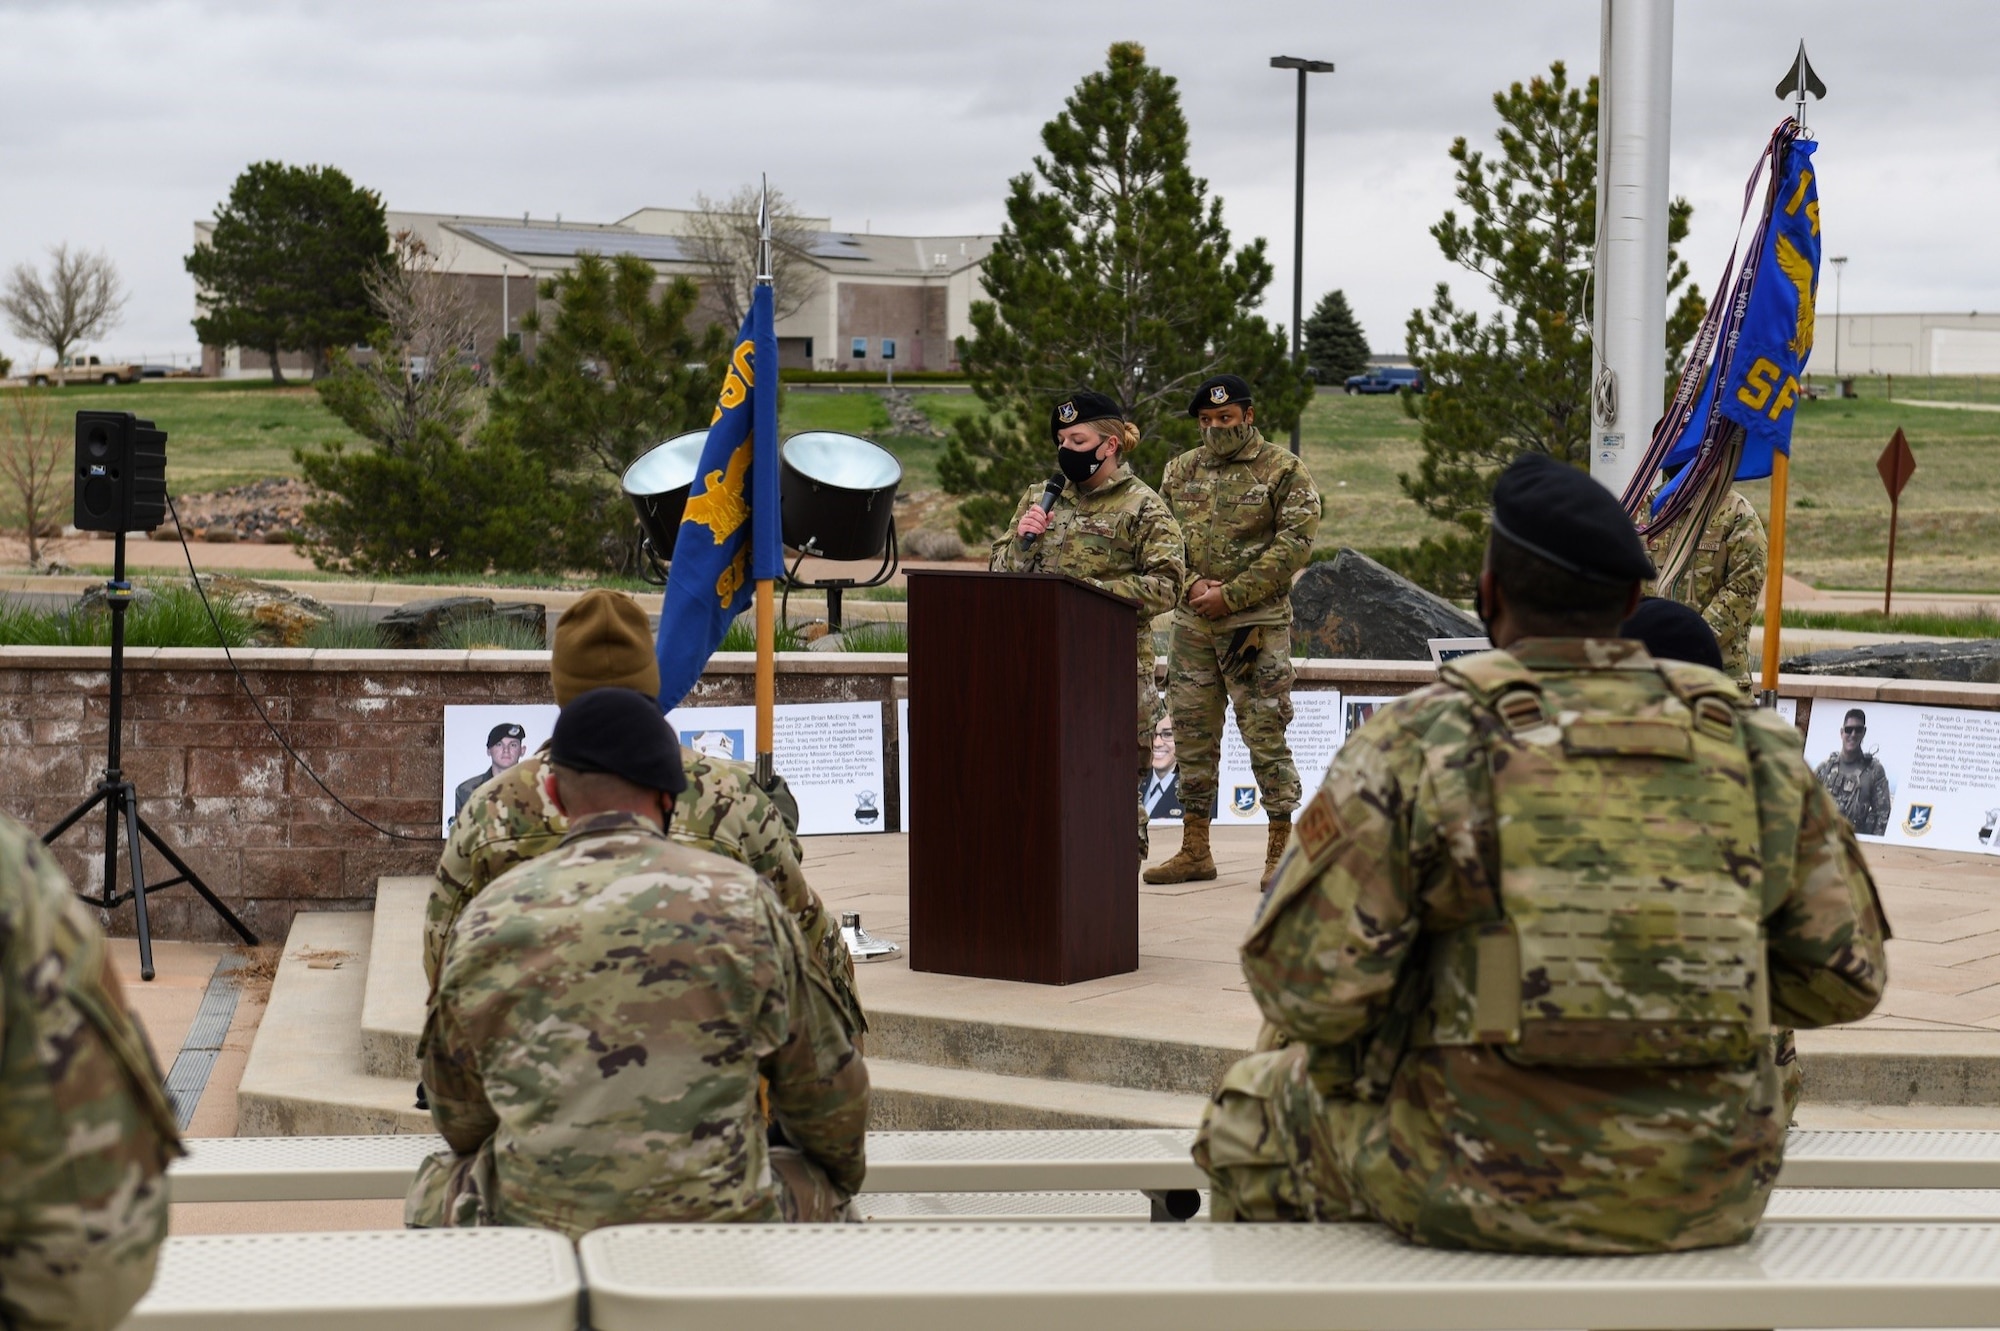 Staff Sgt. Delaney Timchak, a defender for the 460th Security Forces Squadron, welcomes the crowd during a Police Week opening ceremony on Buckley Air Force Base Colo., May 10, 2021.